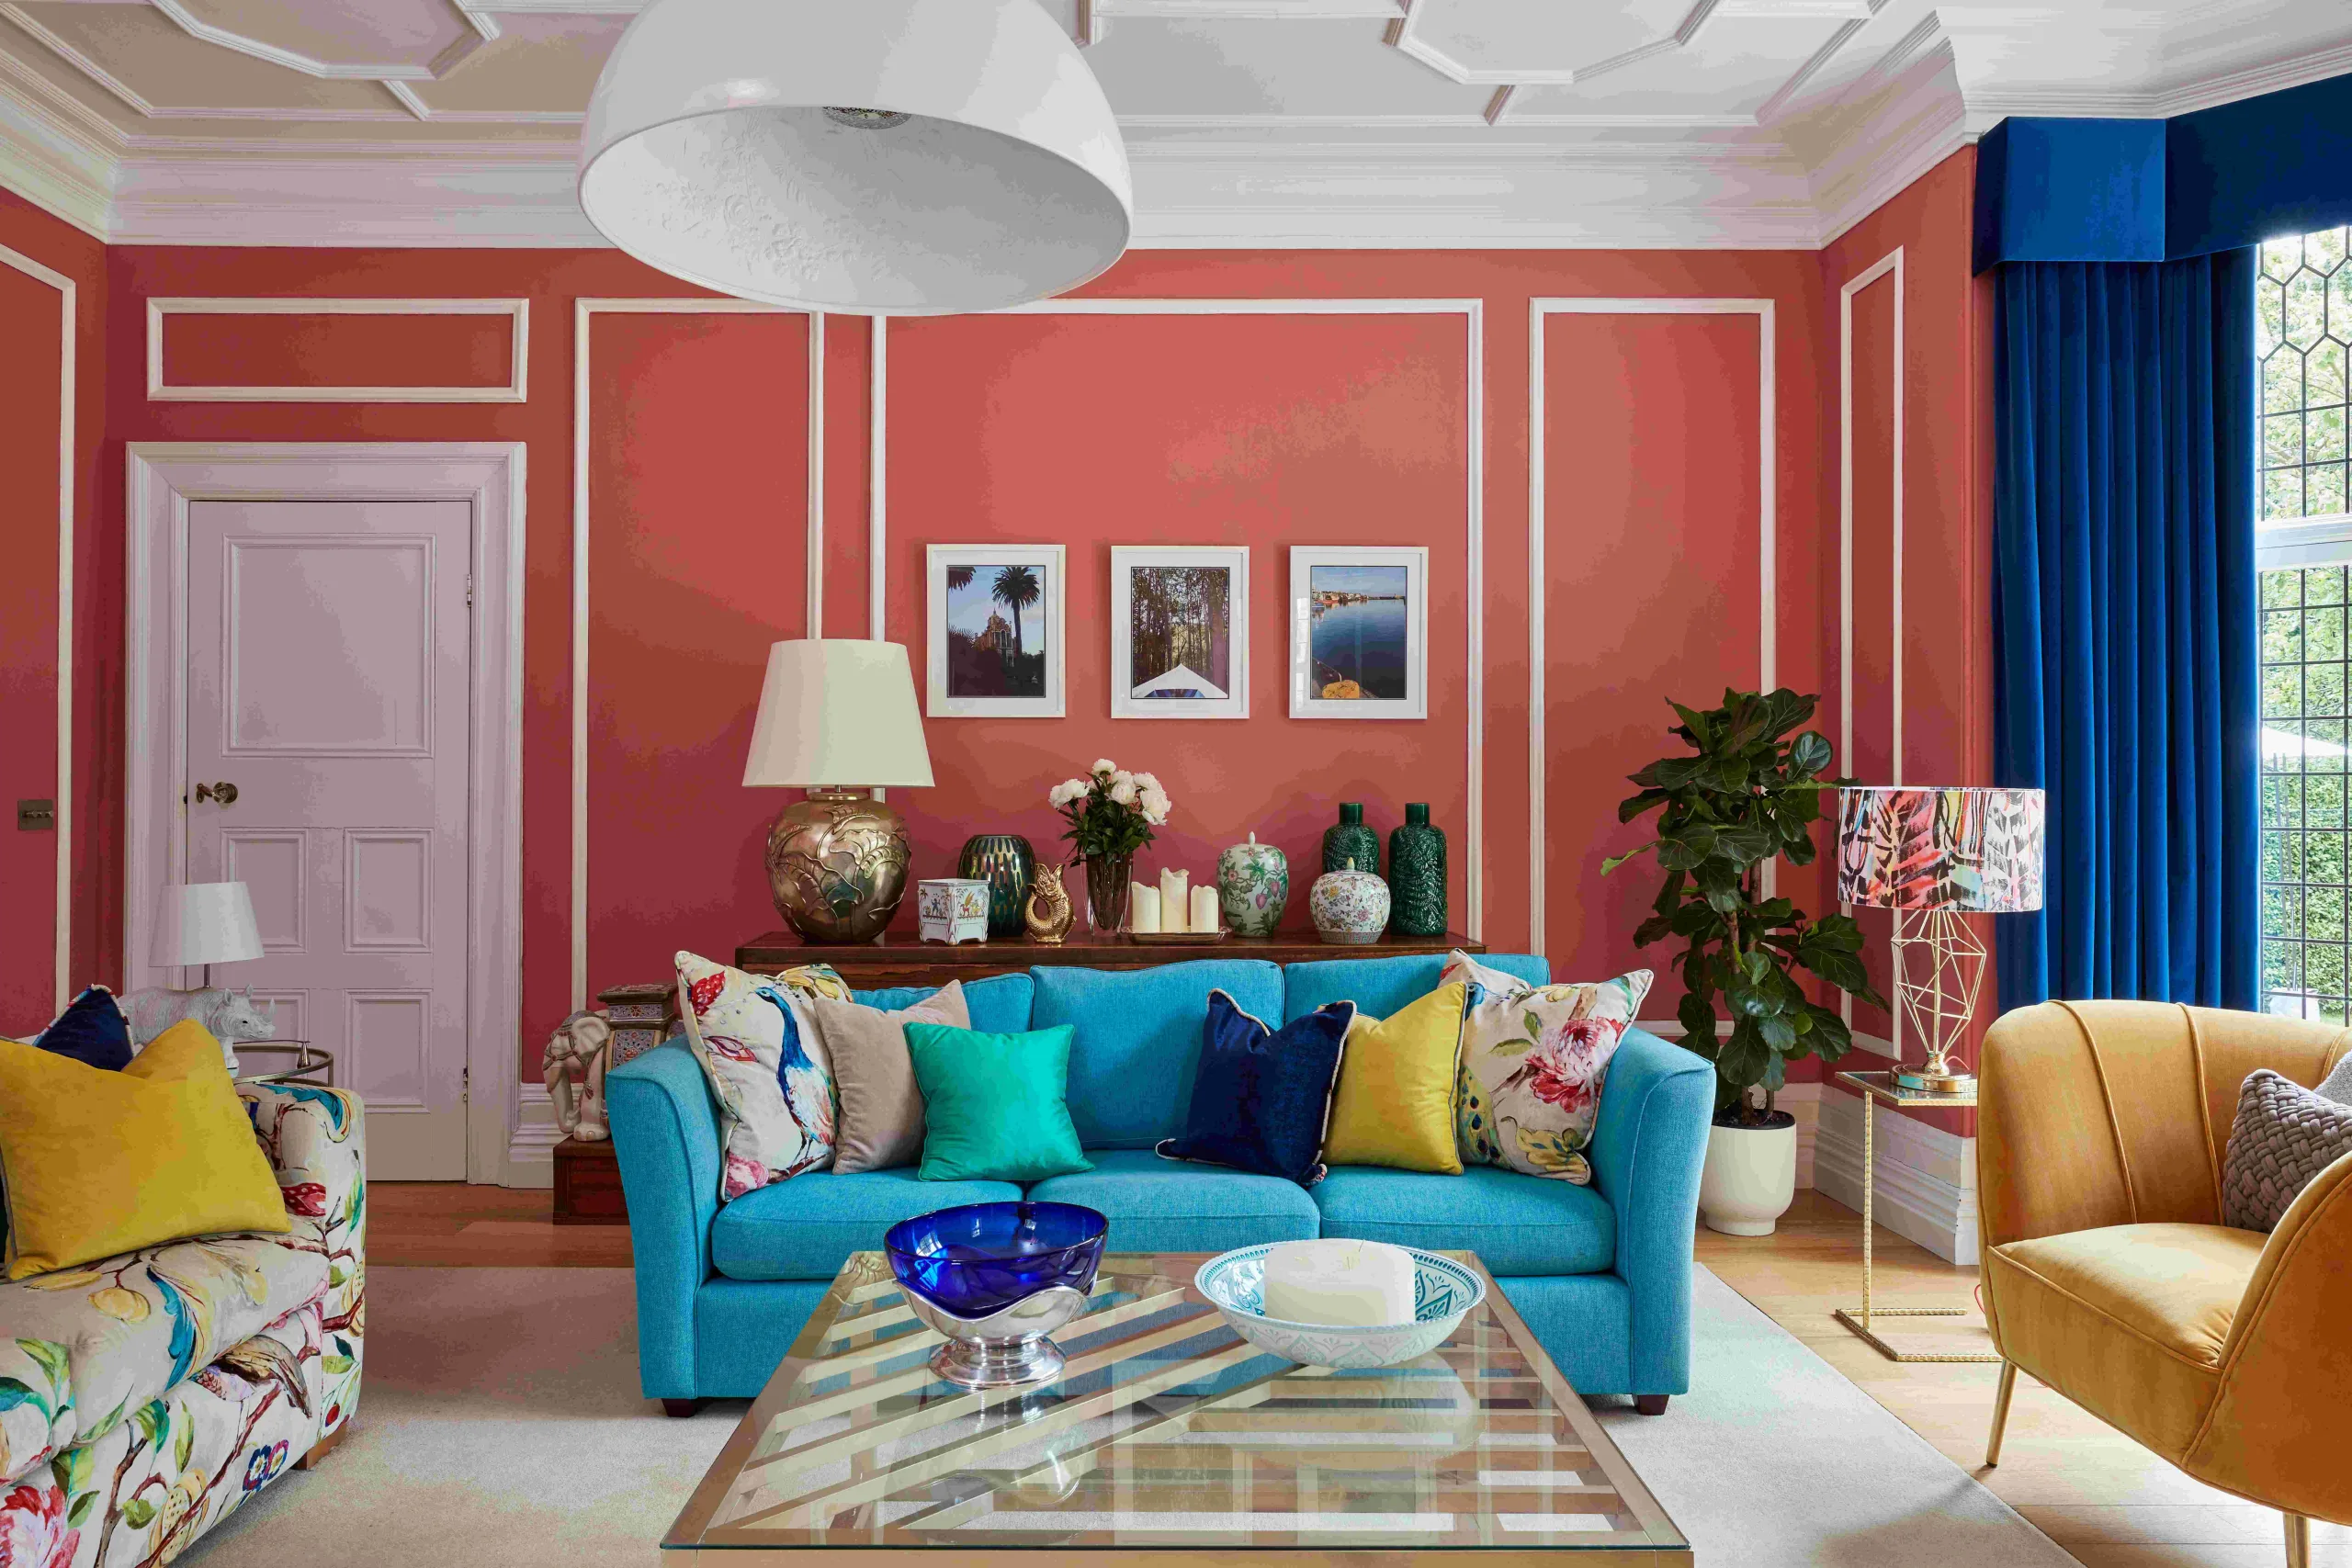 Bright colours used in a light setting create a feast for the eyes